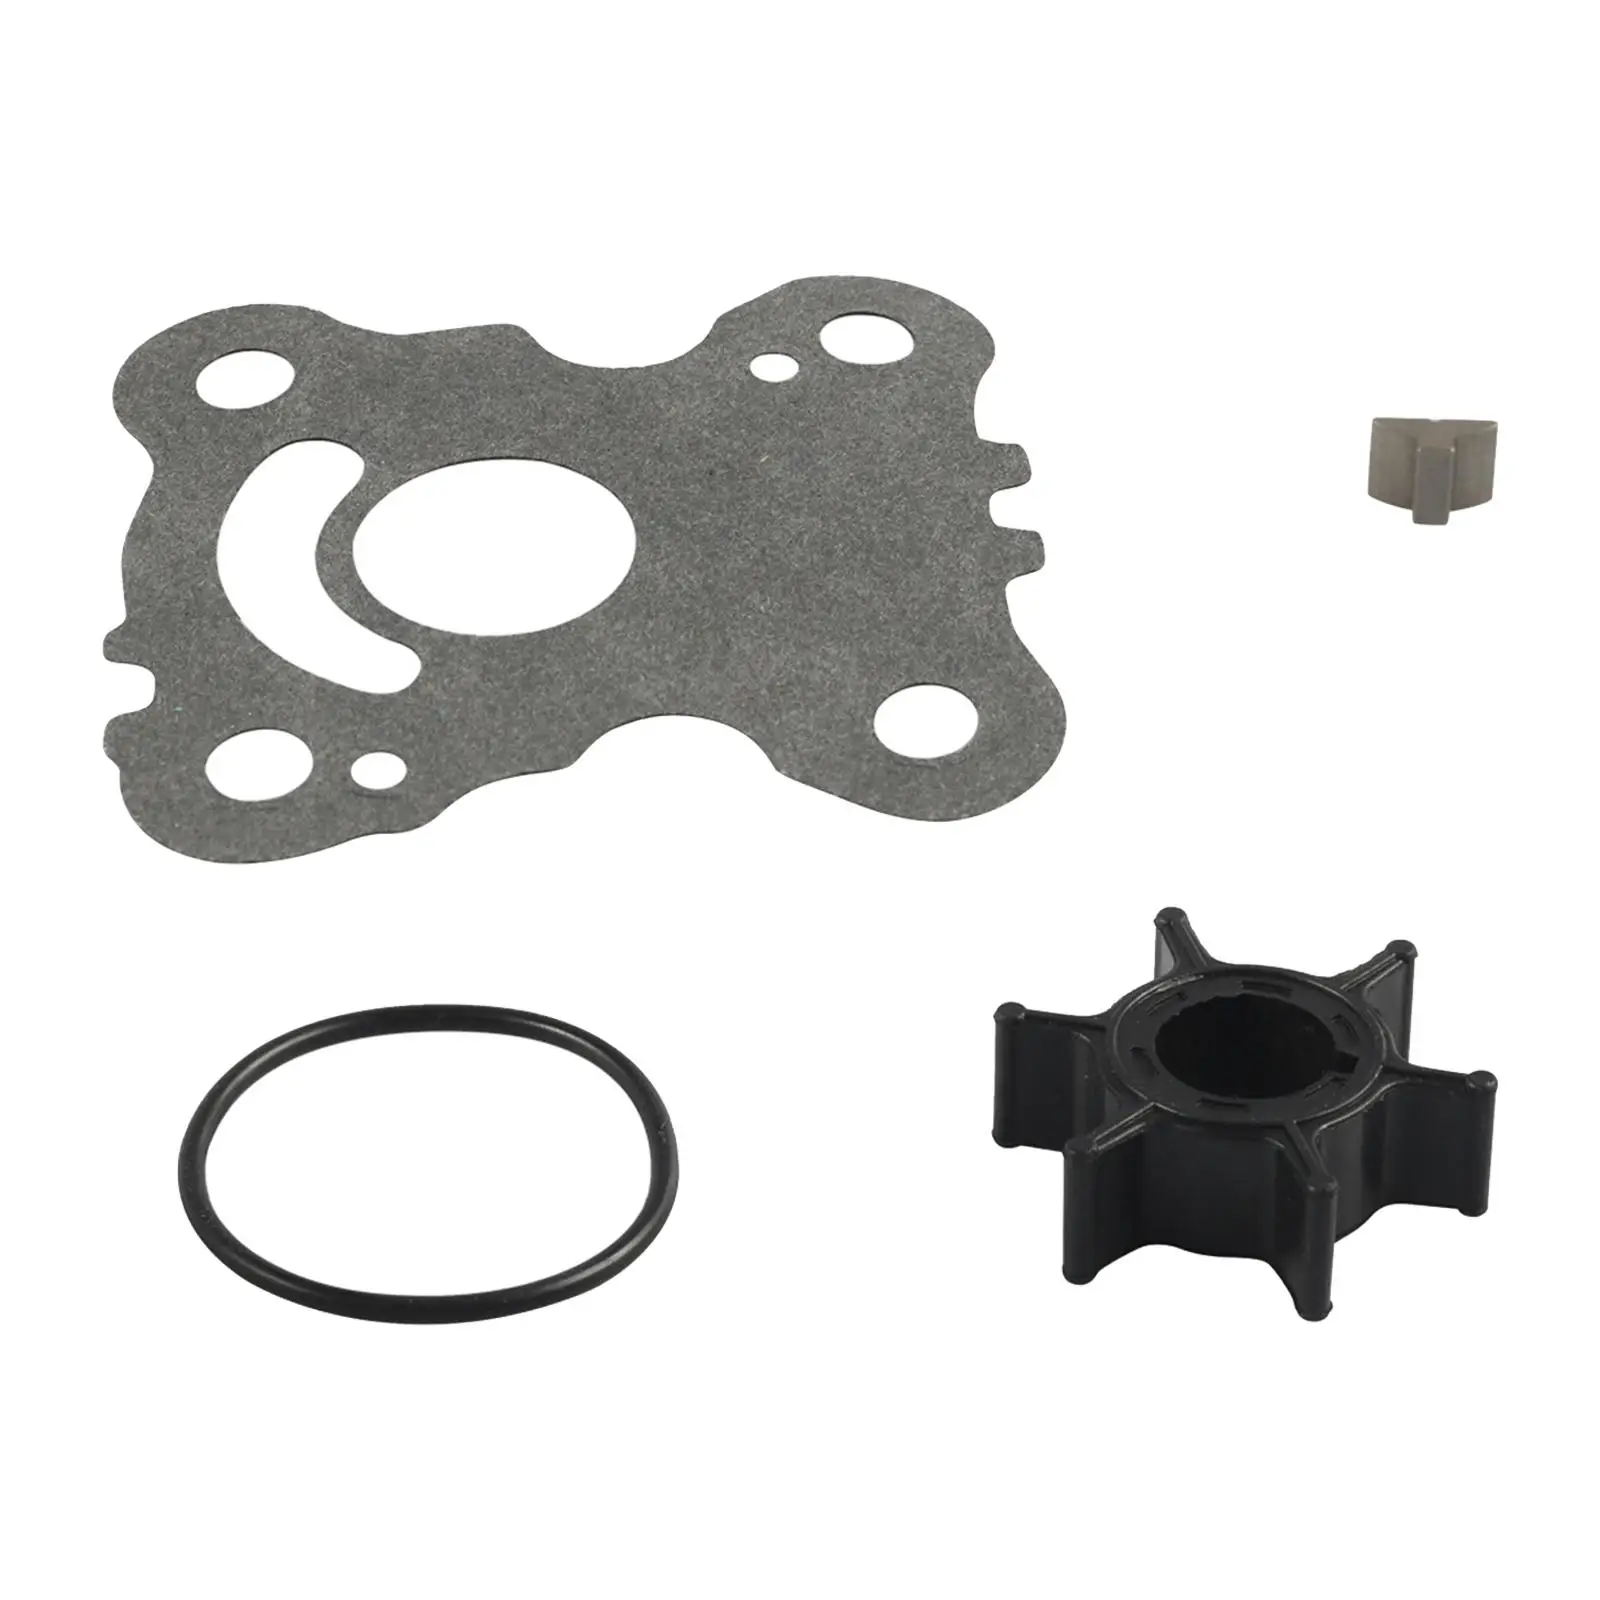 Water Pump Impeller Service Kit 06192-zw9-a30 for Honda Outboard BF20D